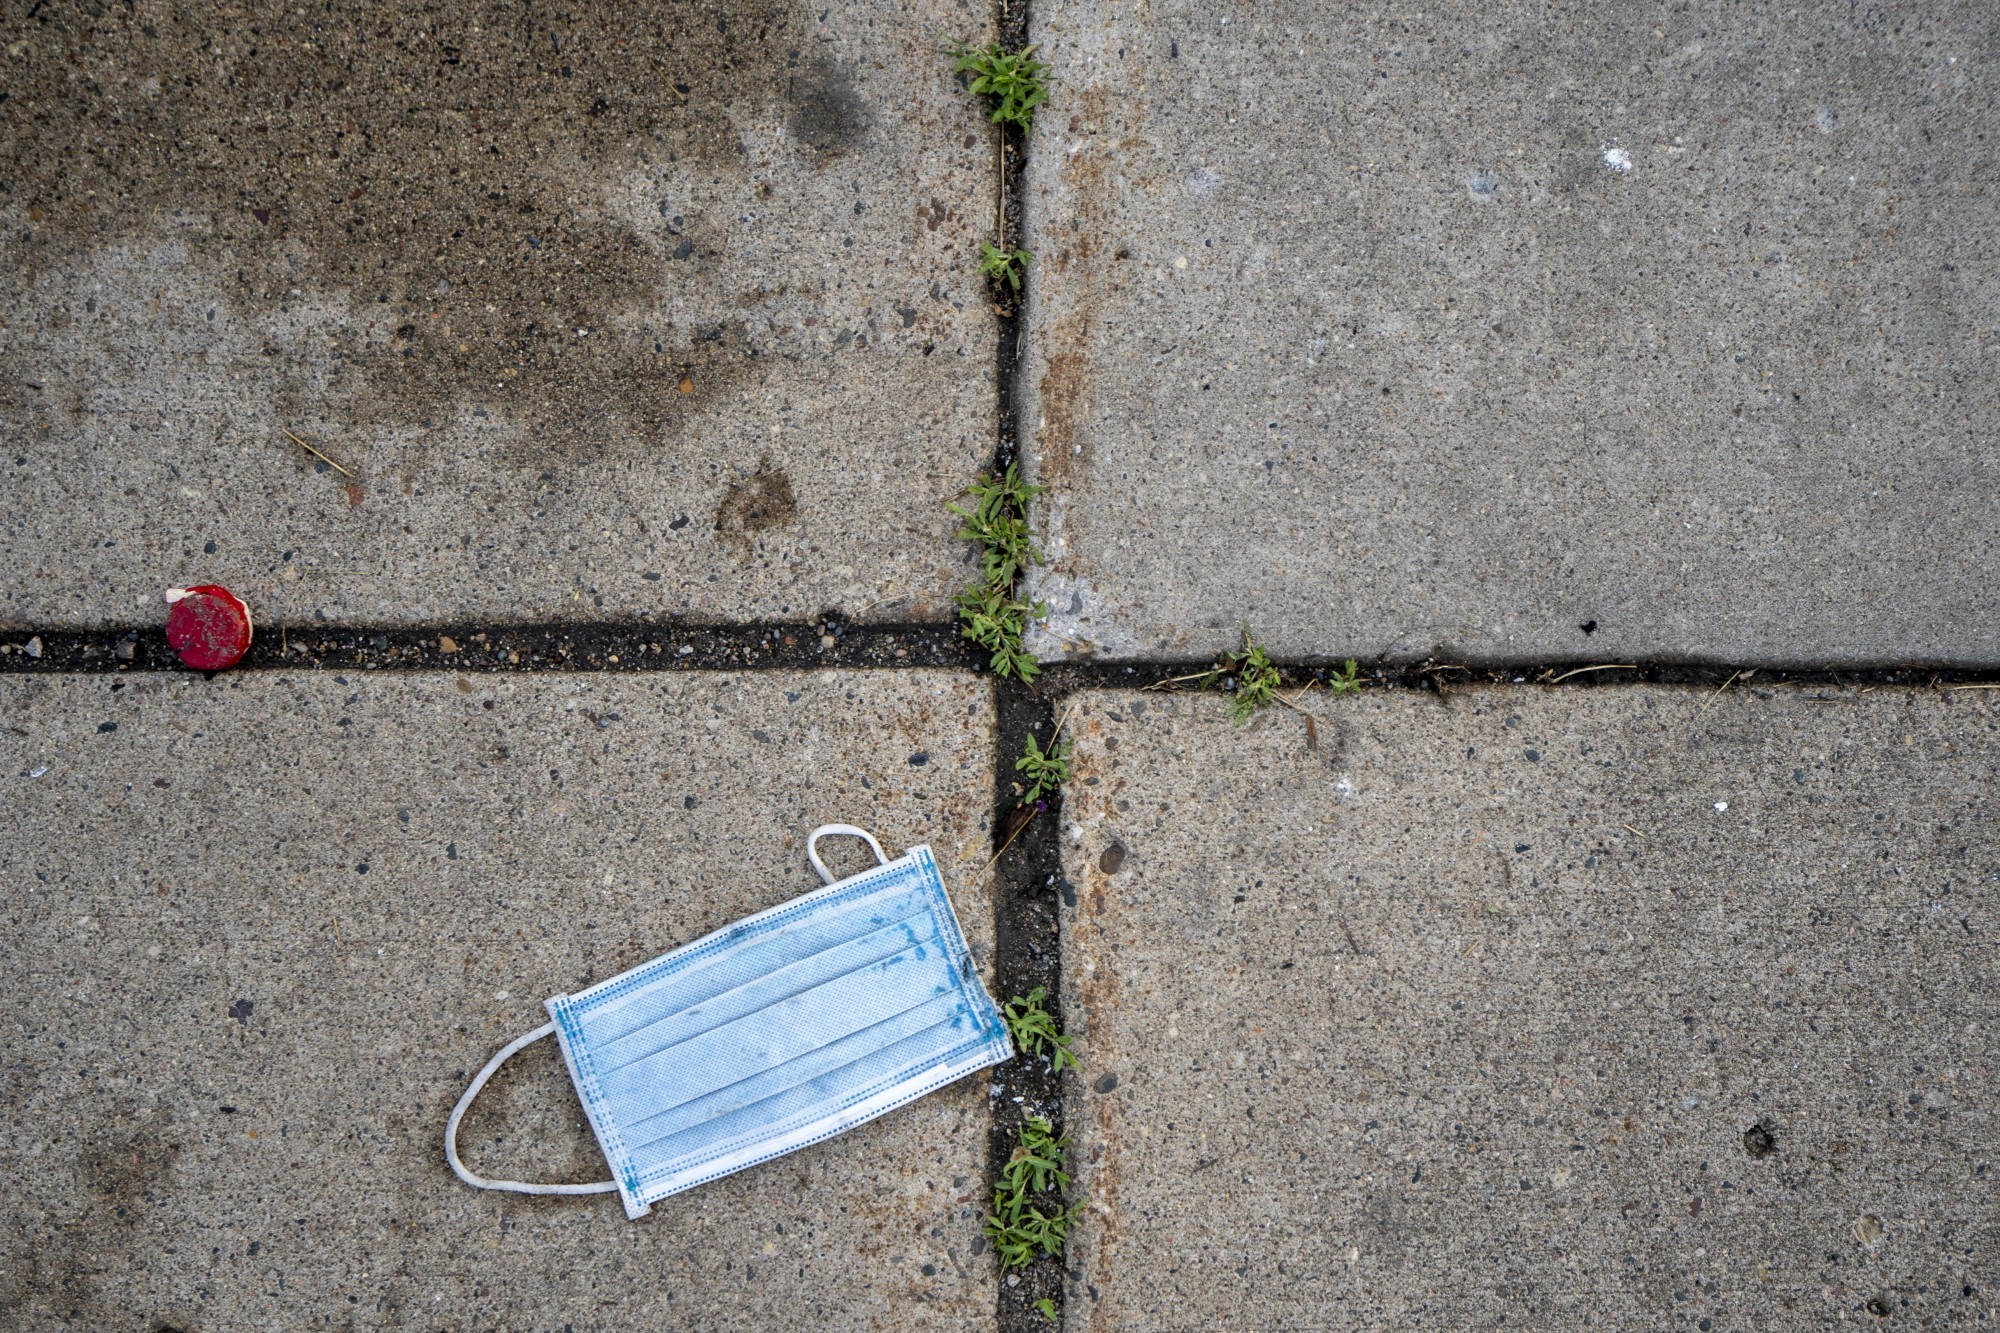 A face mask is seen on the ground the morning after a second night of protests that turned violent near the Minneapolis Police 3rd Precinct following the death of George Floyd. Dozens of businesses were vandalized and firefighters were still working to control several blazes still at hand on Thursday, May 28. 